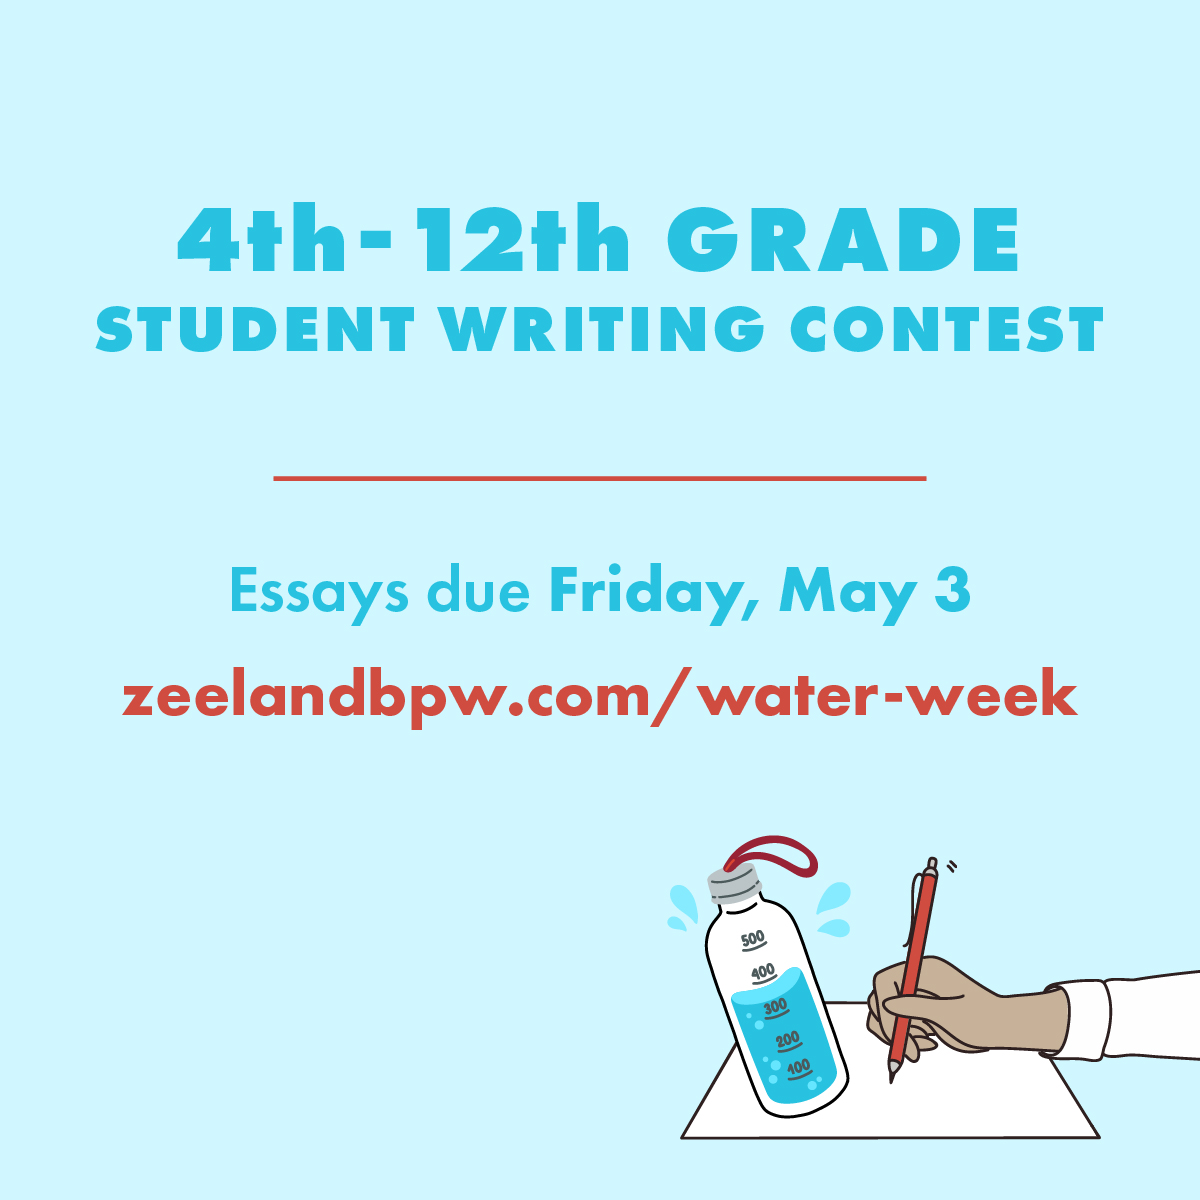 Our water department invites students from 4th to 12th grade to write a short essay answering the question 'Why is safe drinking water important to our community?”

Get all the info and submit your student's essay by this Friday at zeelandbpw.com/water-week #CommunityPowered